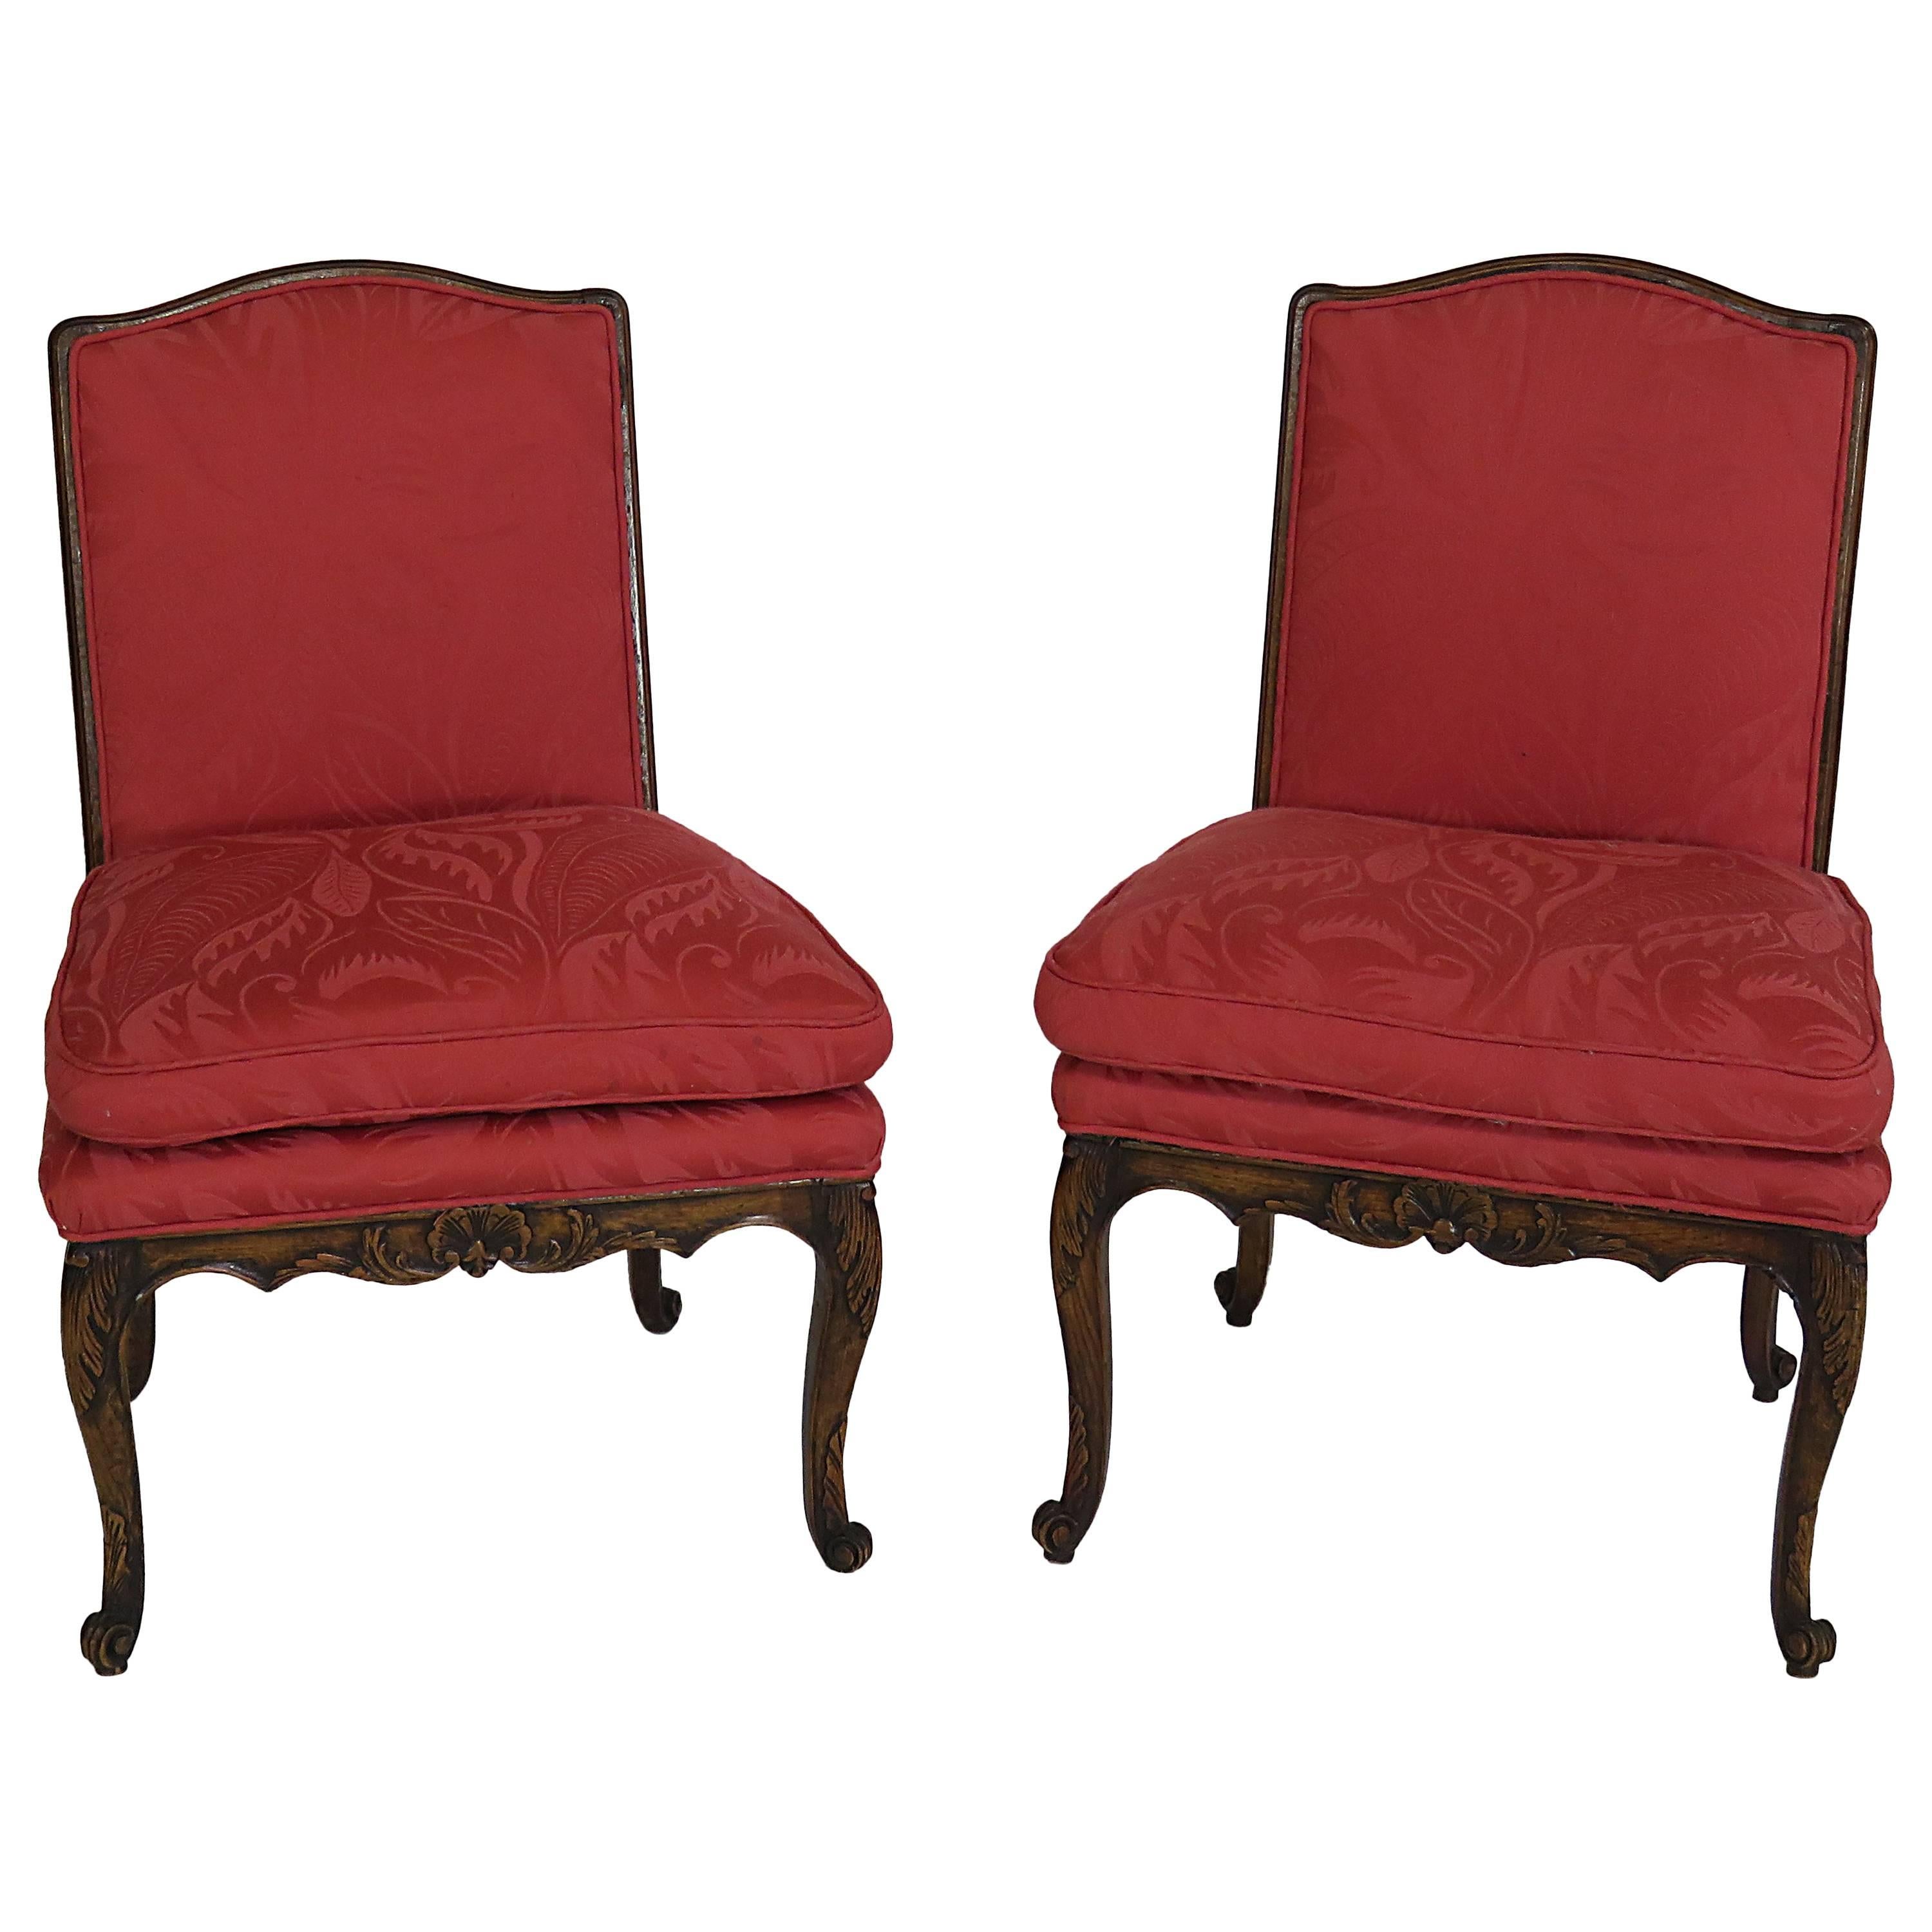 Two pairs of Louis XVI Chairs